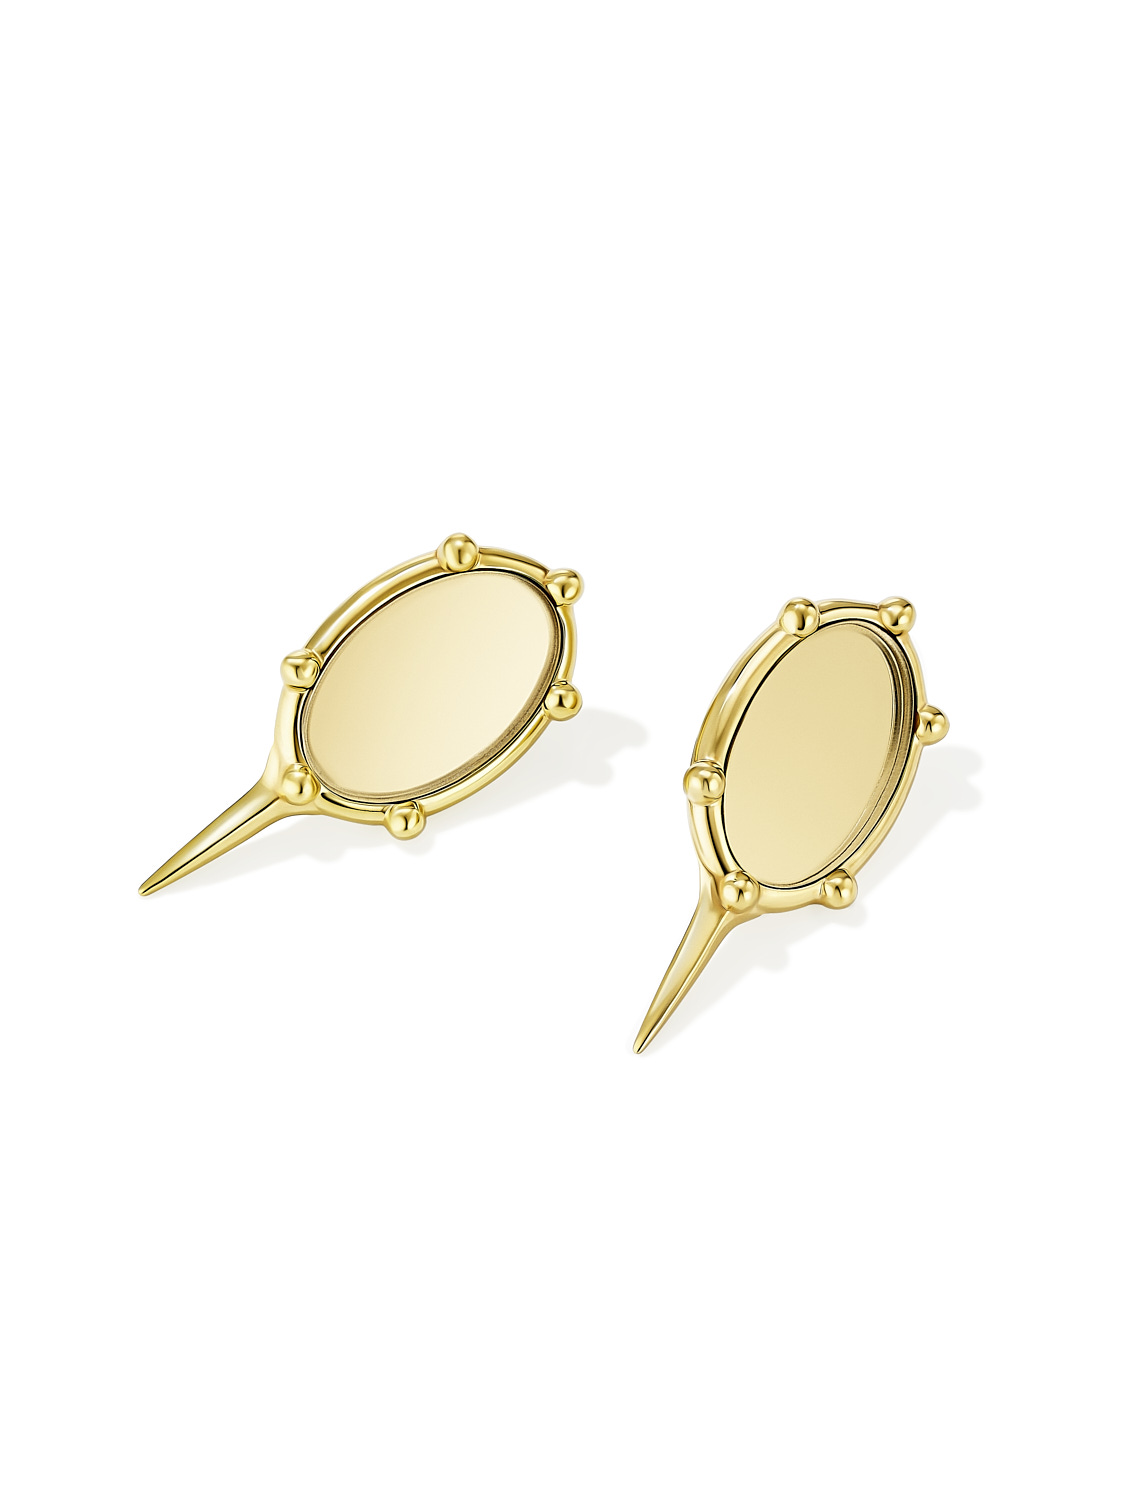 MIRROR EARRINGS GOLD-PLATED  